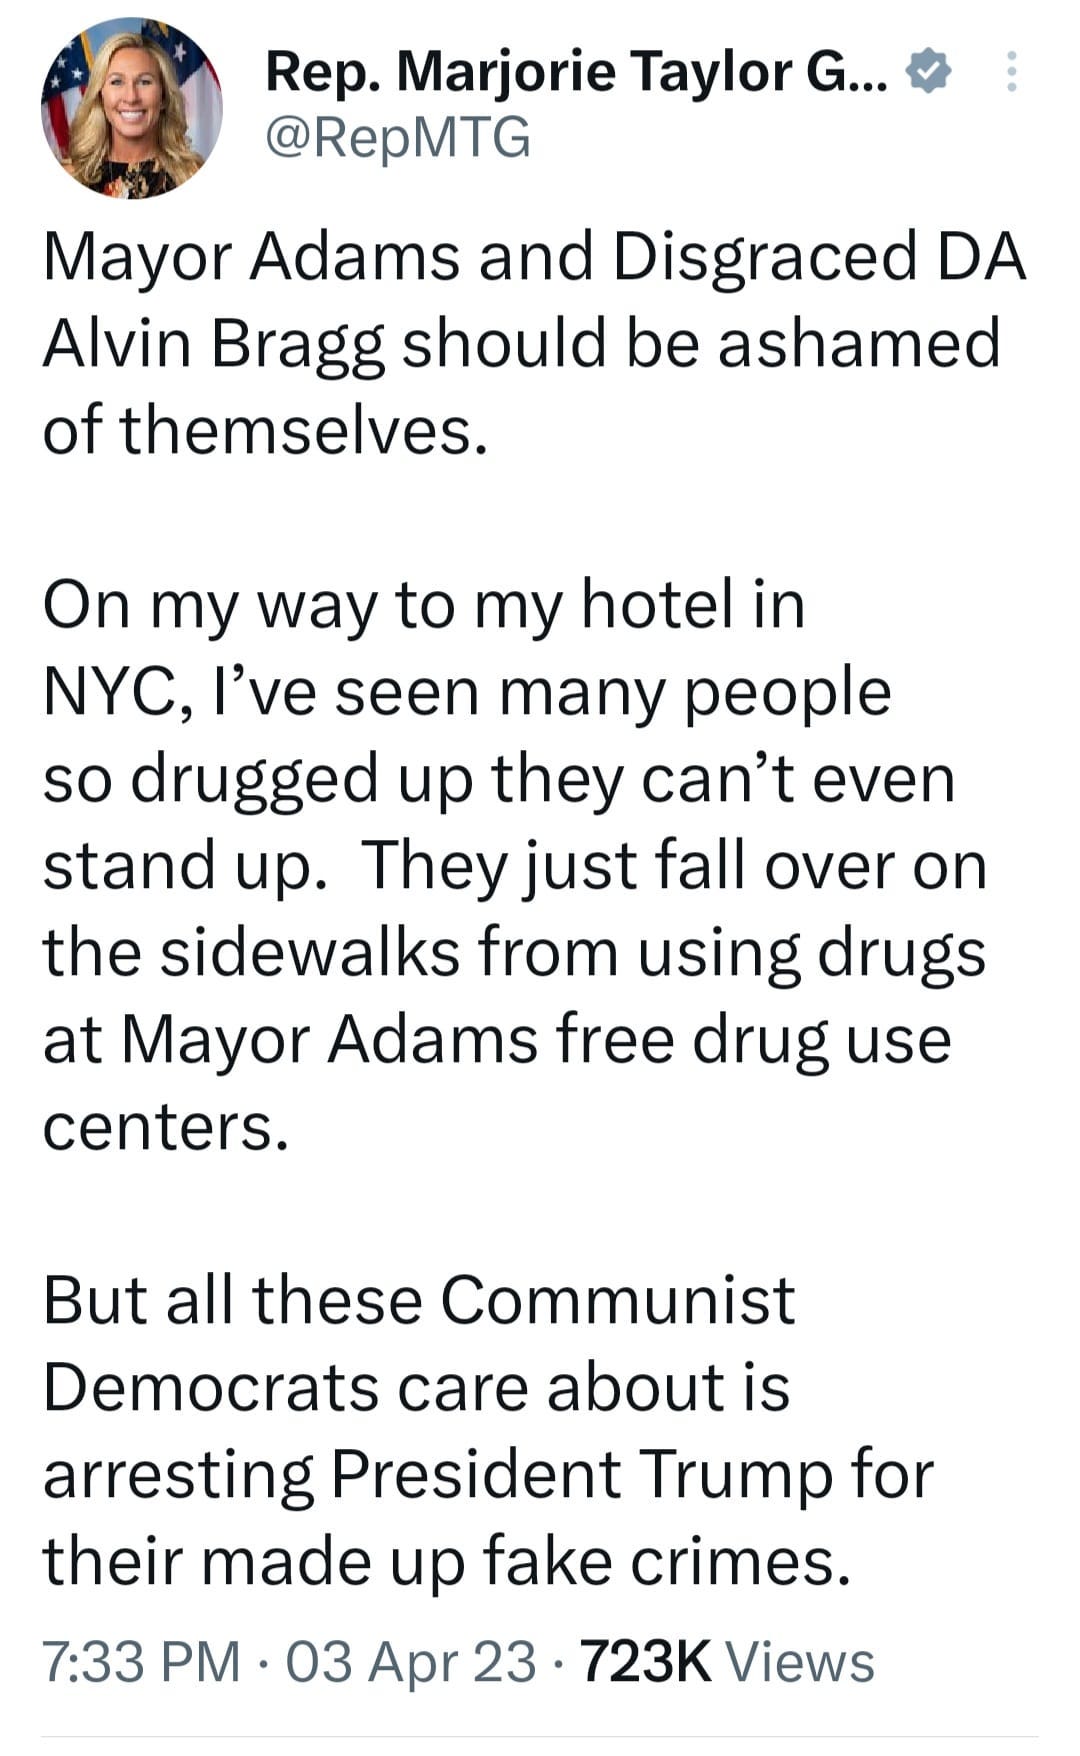 May be an image of 1 person and text that says 'Rep. Marjorie Taylor G... @RepMTG Mayor Adams and Disgraced DA Alvin Bragg should be ashamed of themselves. On my way to my hotel in NYC, I've seen many people so drugged up they can't even stand up. They just fall over on the sidewalks from using drugs at Mayor Adams free drug use centers. But all these Communist Democrats care about is arresting President Trump for their made up fake crimes. 7:33 PM 03 Apr 23 723K Views'